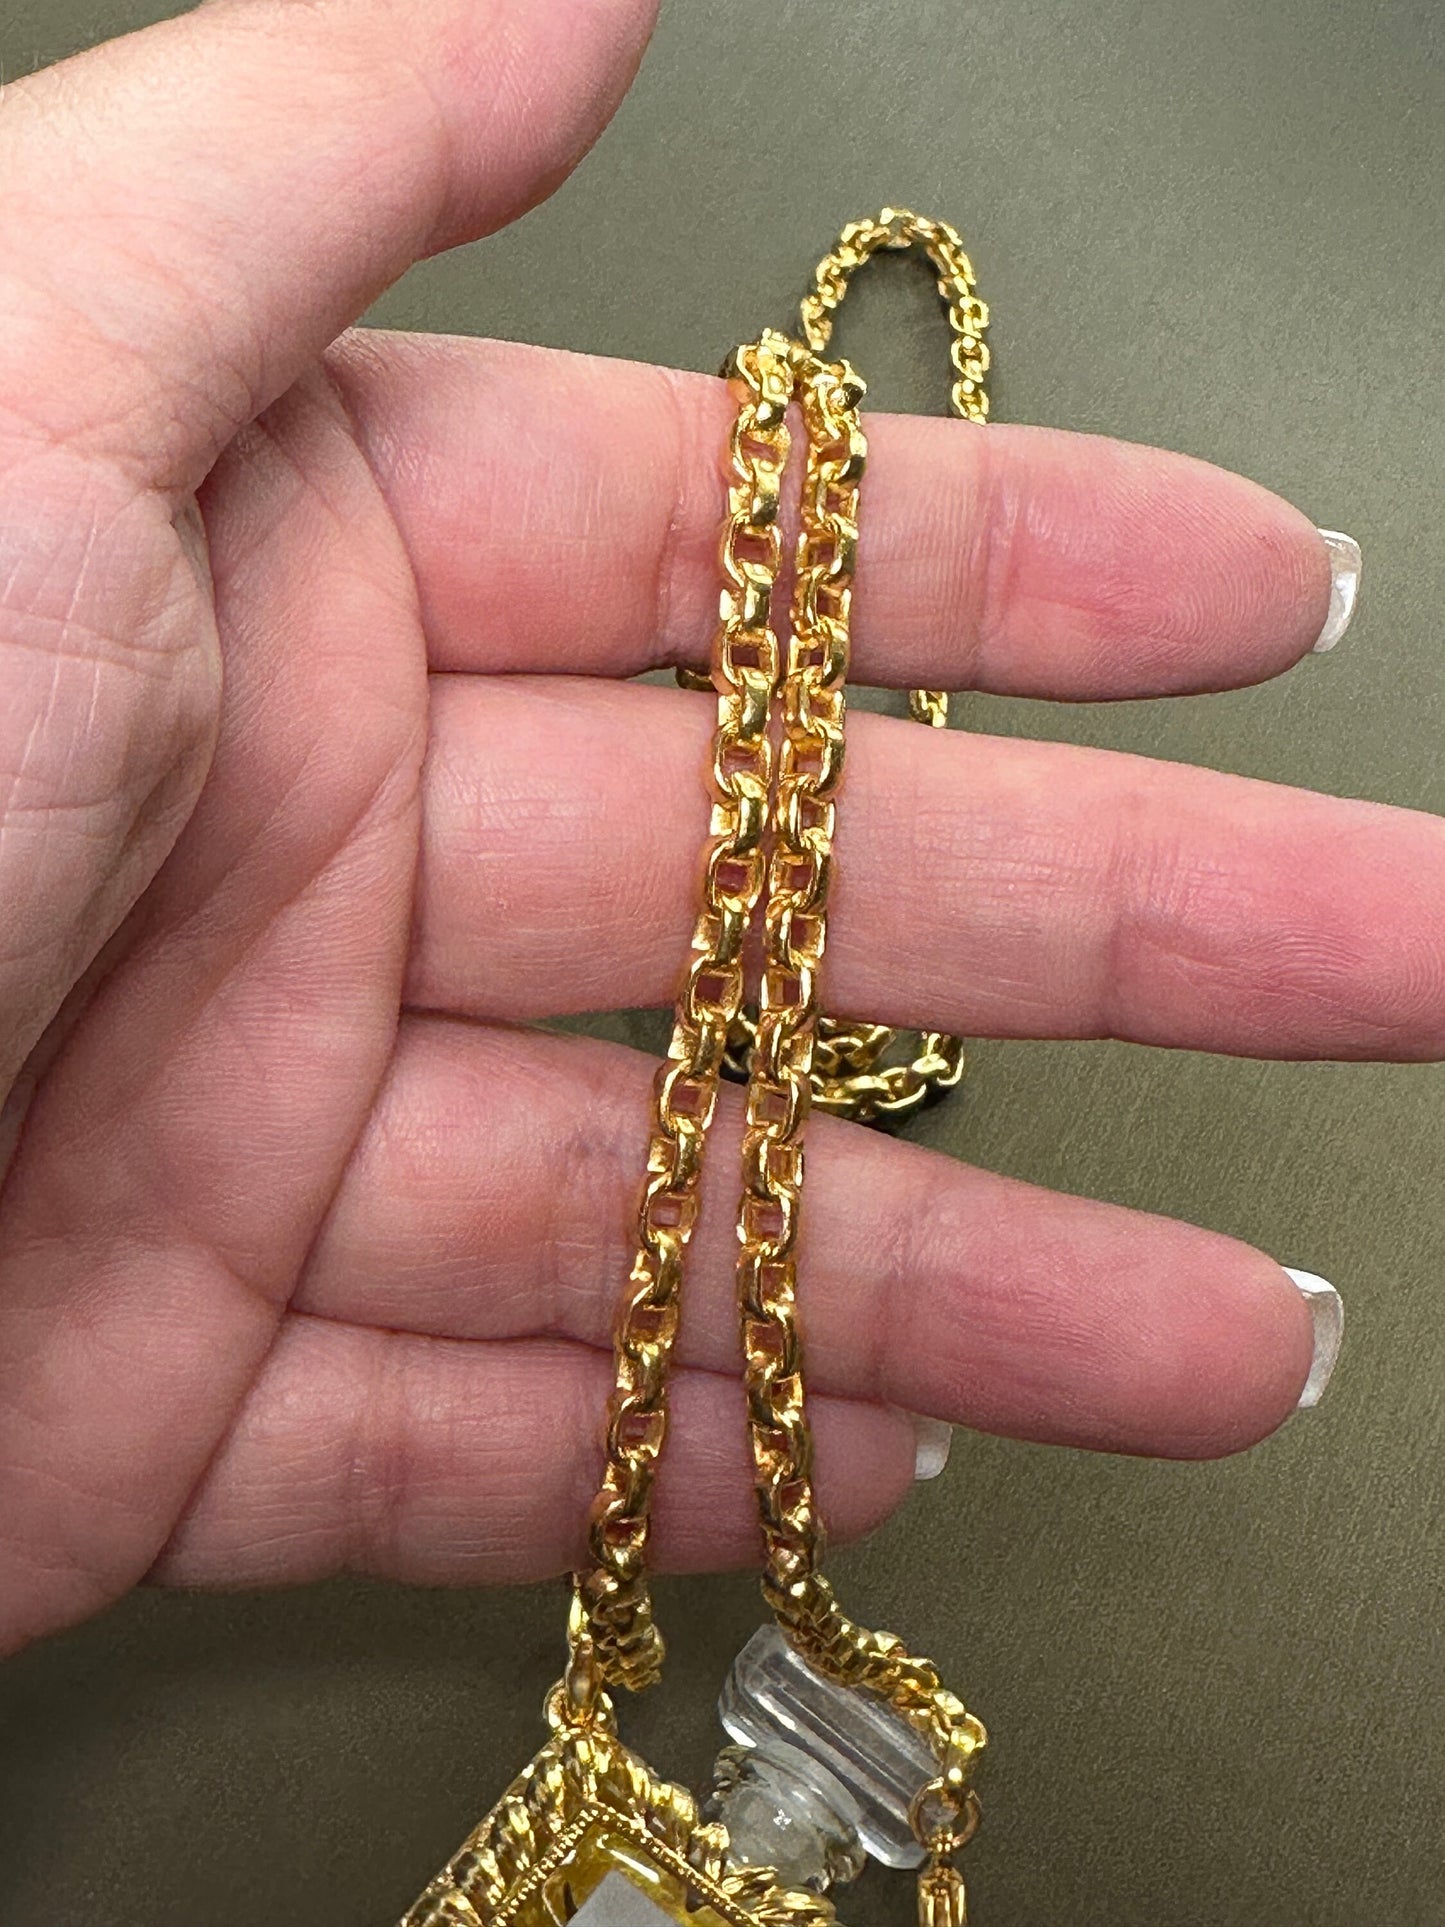 CHANEL VINTAGE 100% Authentic Genuine No. 19 Perfume Charm Double-sided Necklace in Gold Plated, 1990's, Great Condition, Grade AB